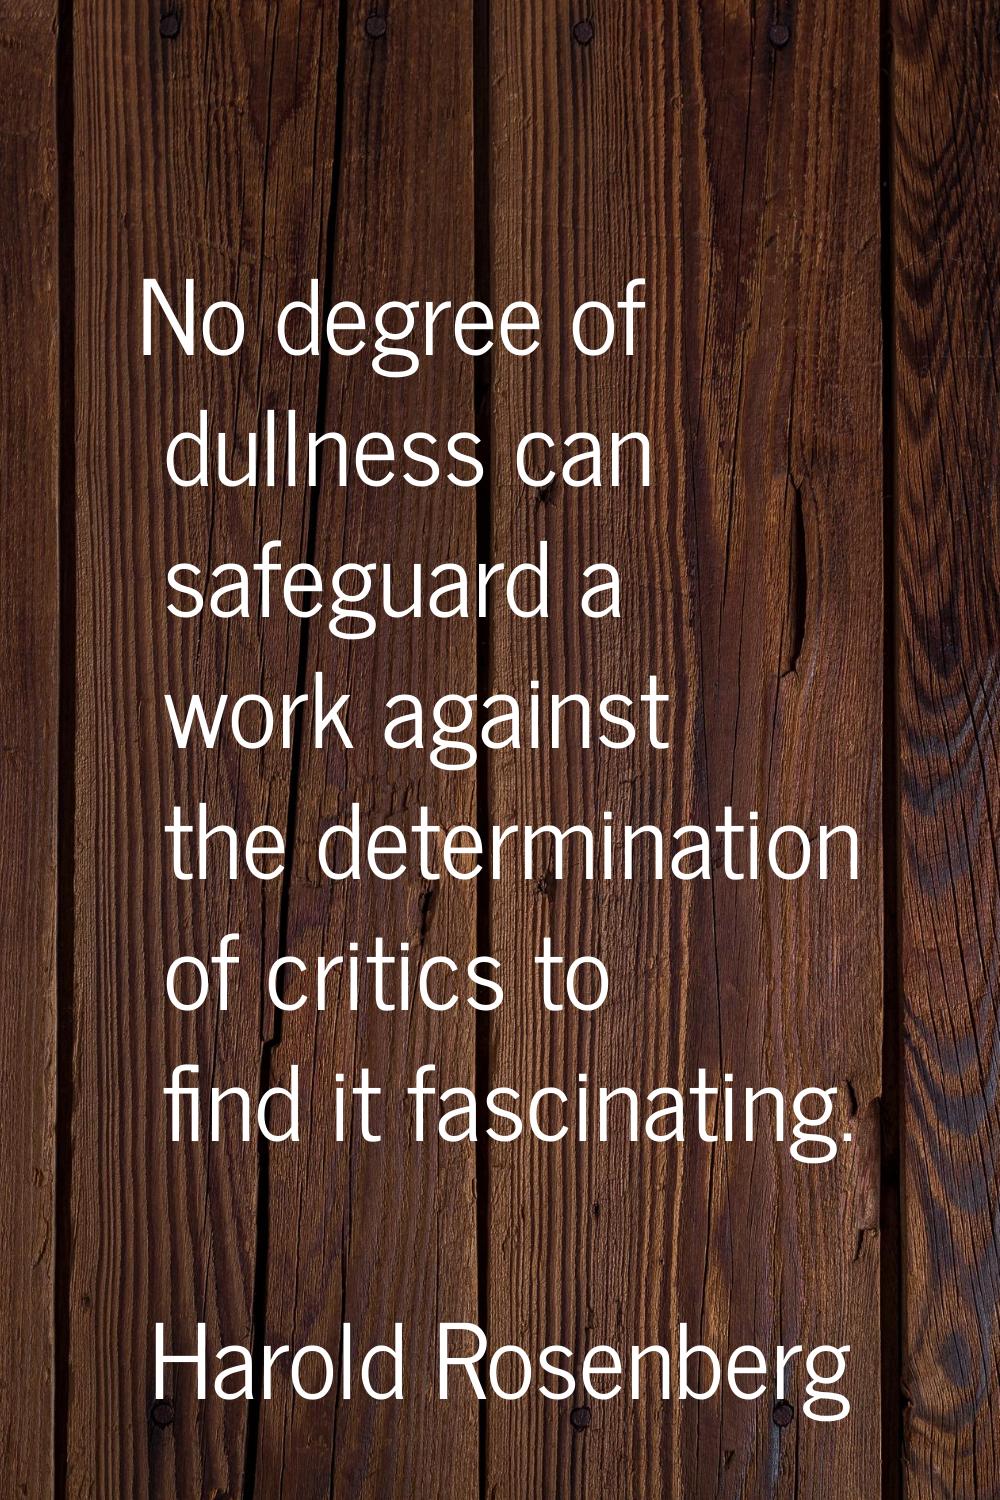 No degree of dullness can safeguard a work against the determination of critics to find it fascinat